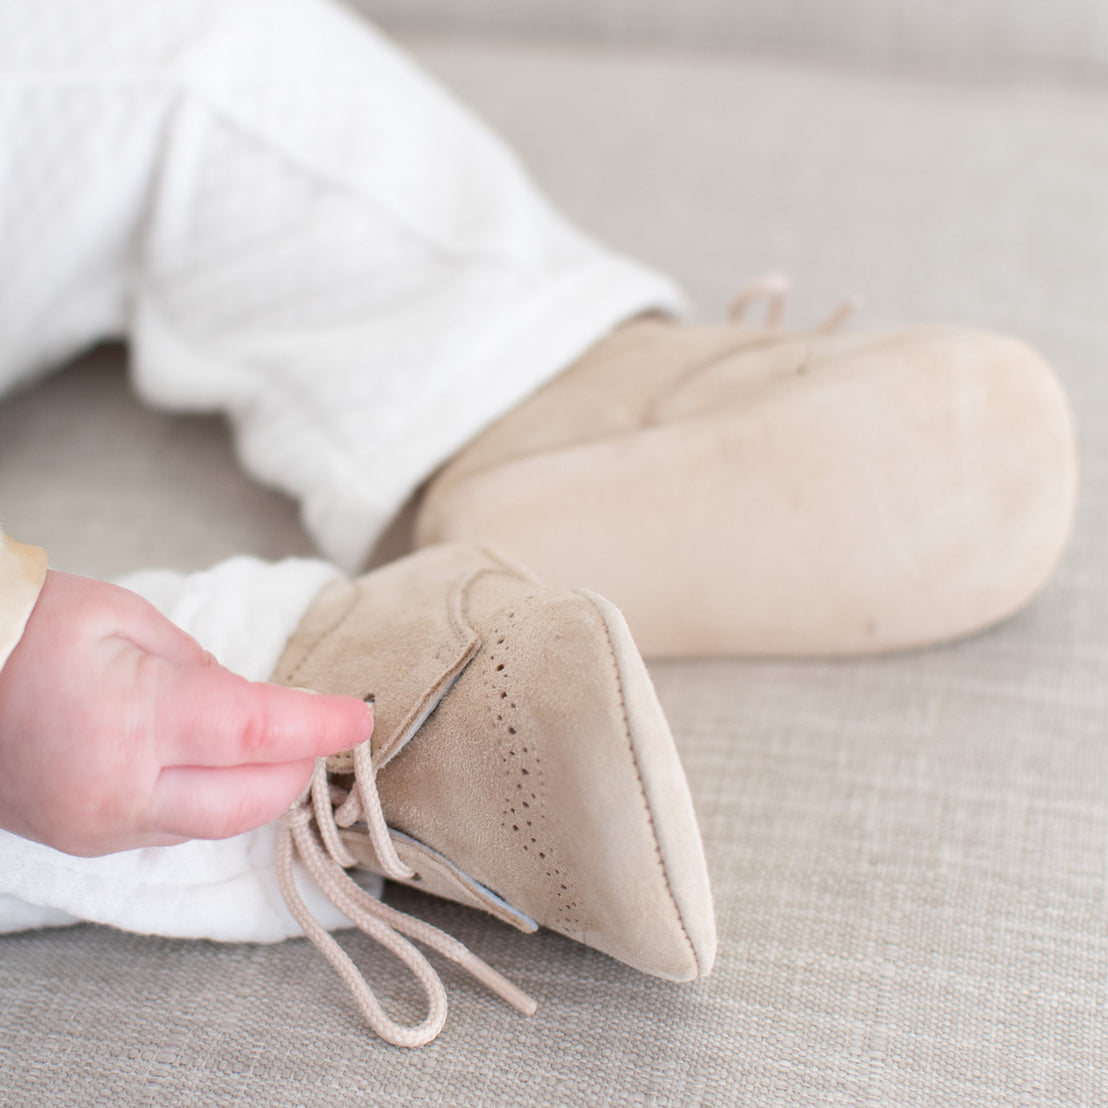 A close-up of a baby's feet in Camel Suede Shoes with laces, focusing on one hand touching the shoe. The background features a neutral soft fabric.